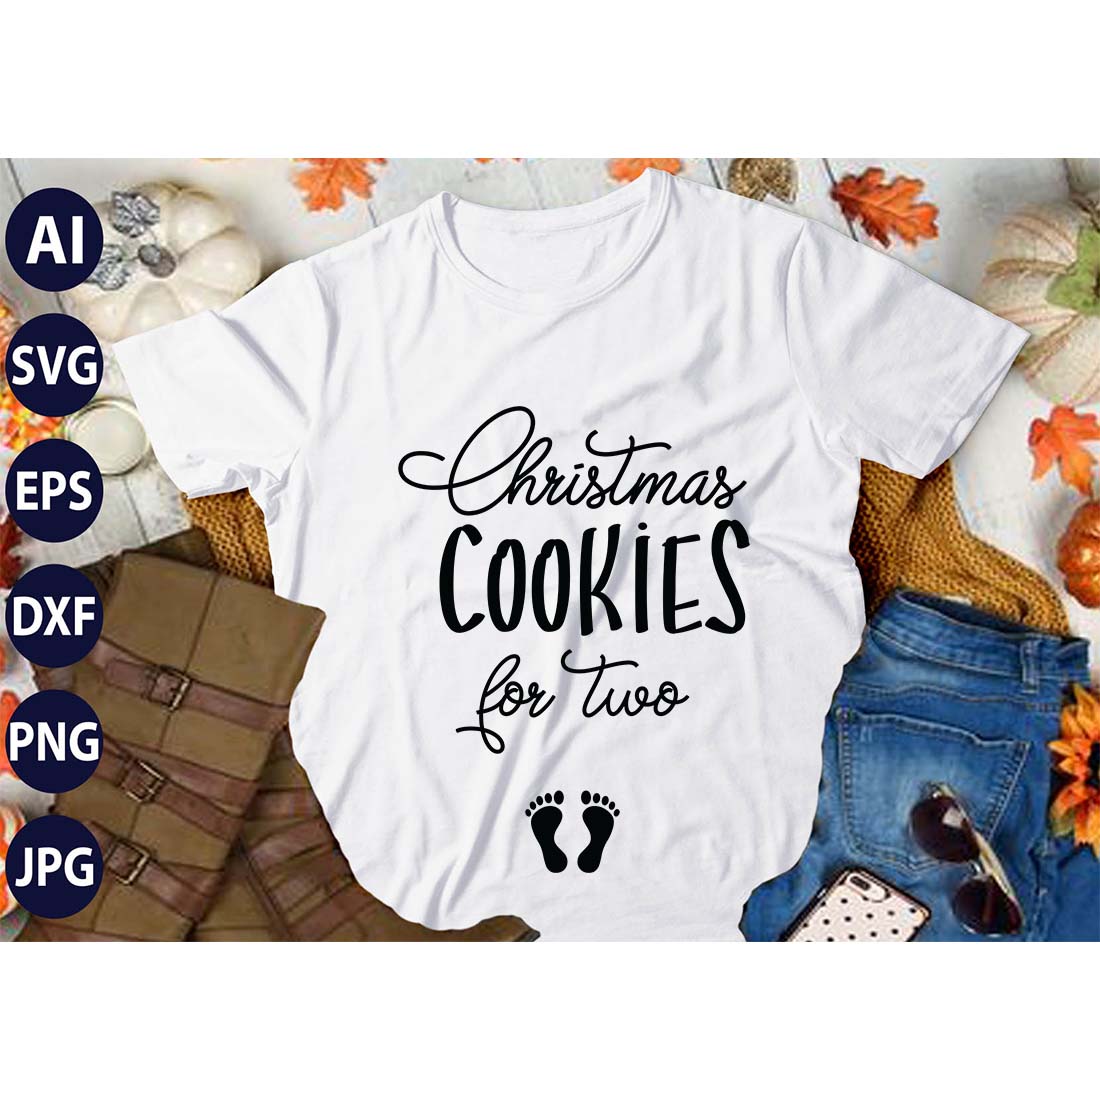 Christmas Cookies For Two, SVG T-Shirt Design |Christmas Retro It's All About Jesus Typography Tshirt Design | Ai, Svg, Eps, Dxf, Jpeg, Png, Instant download T-Shirt | 100% print-ready Digital vector file preview image.